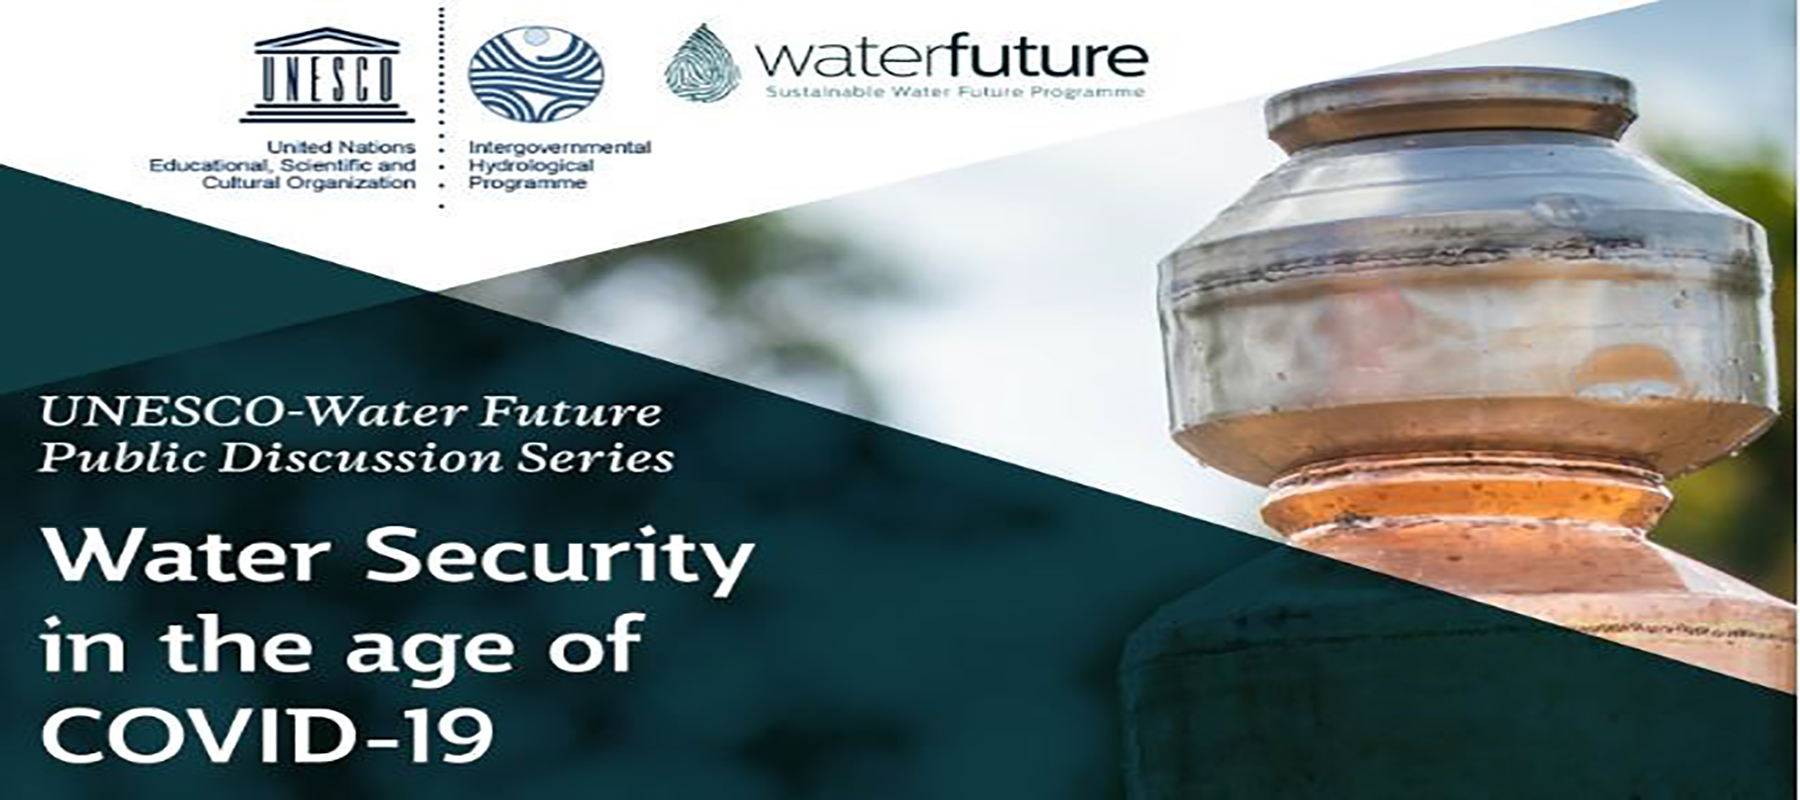 UNESCO-Water Future Public Discussion Series: Water Security in the age of COVID-19